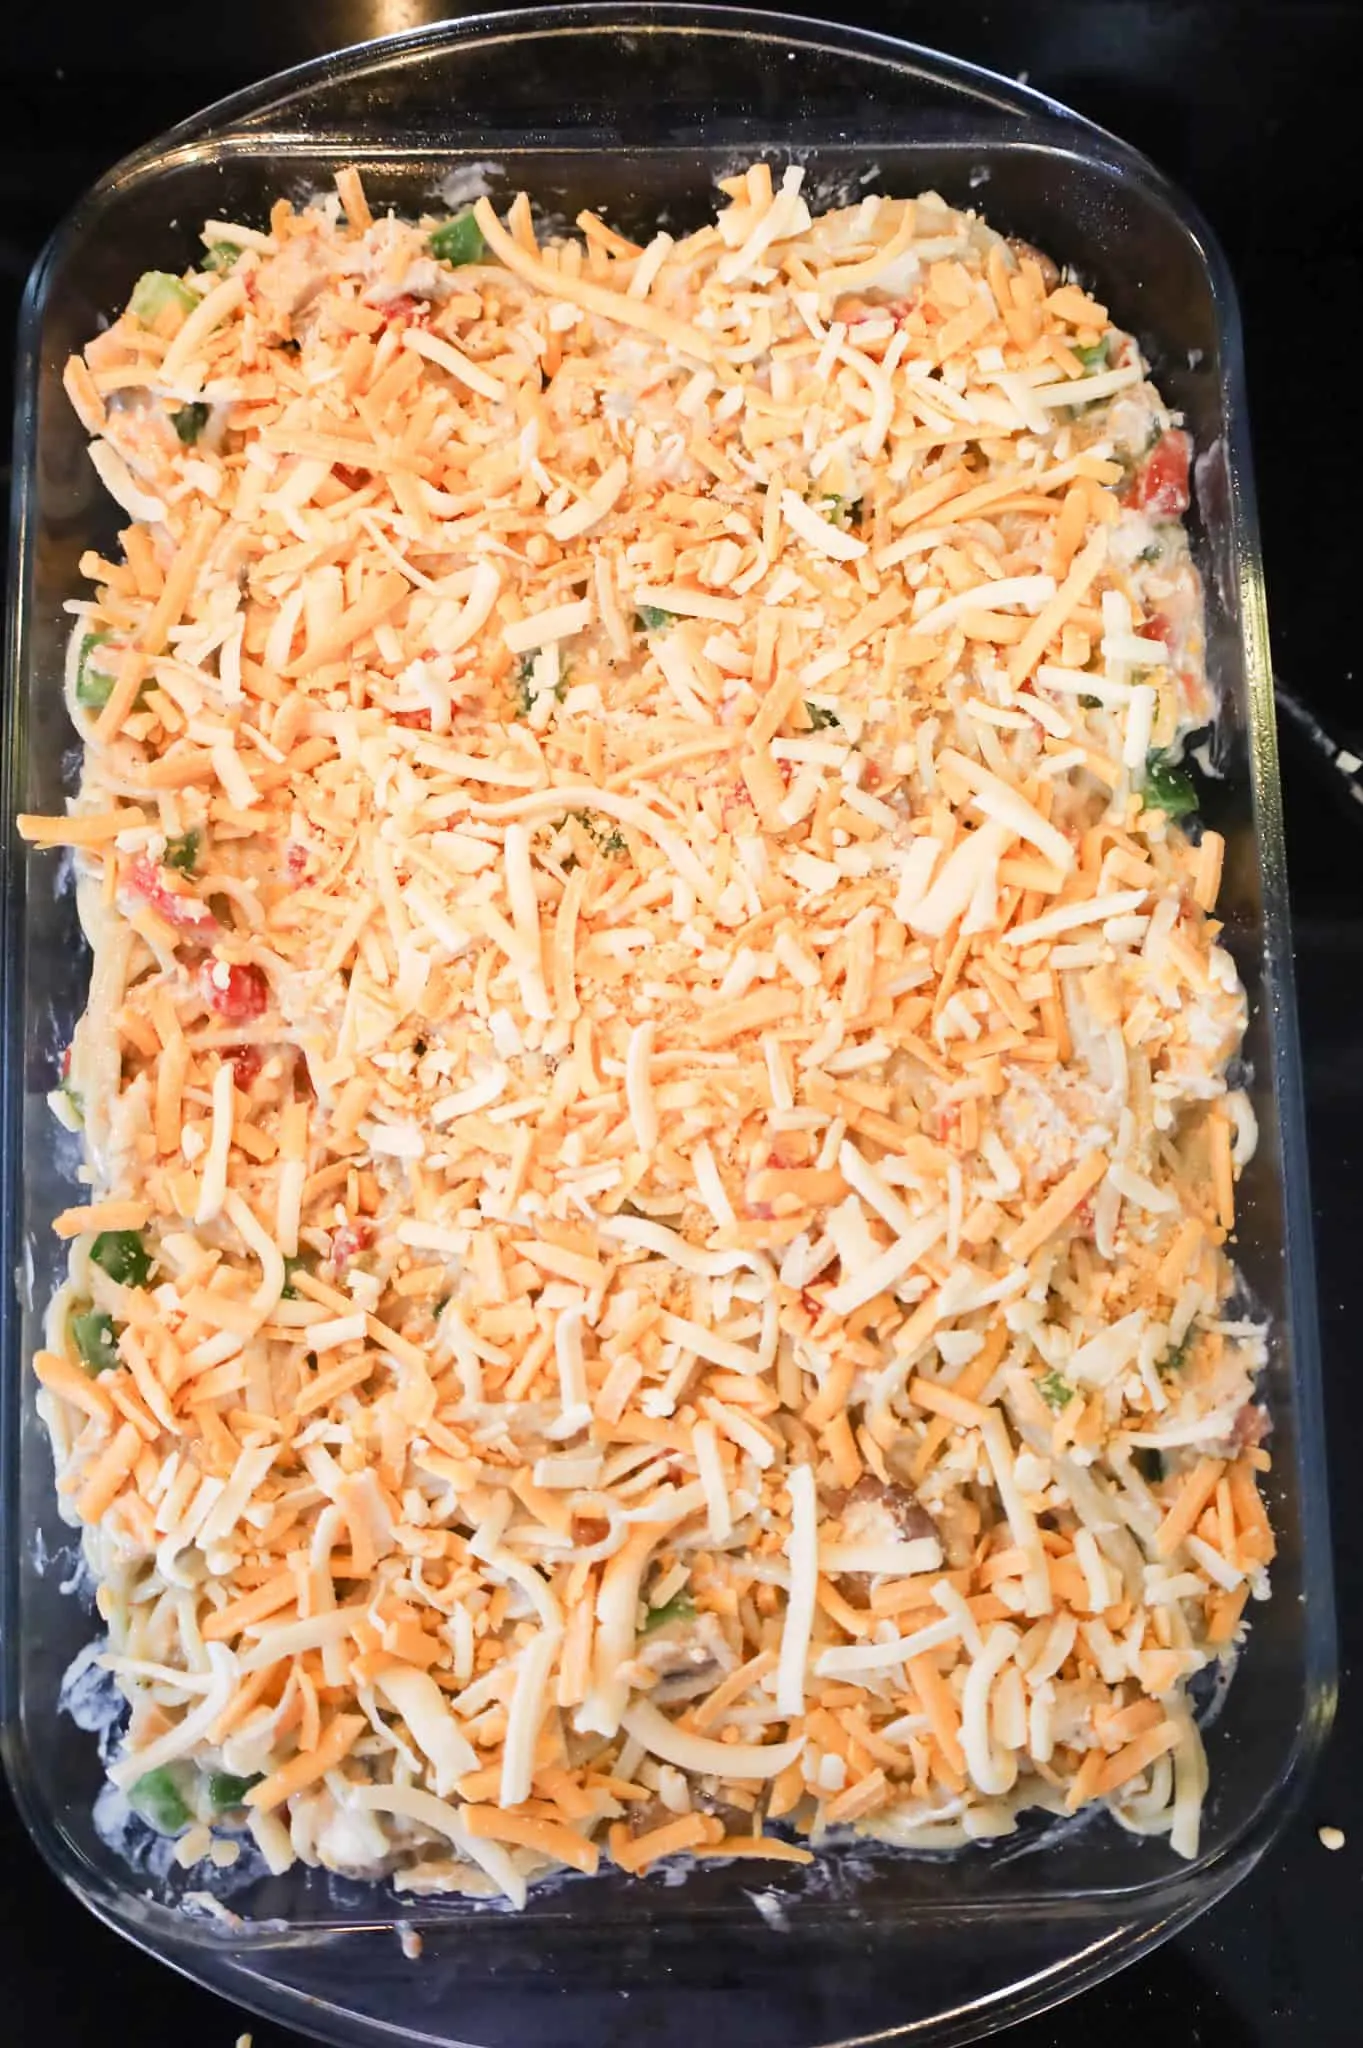 shredded cheese on top of creamy chicken spaghetti in a baking dish